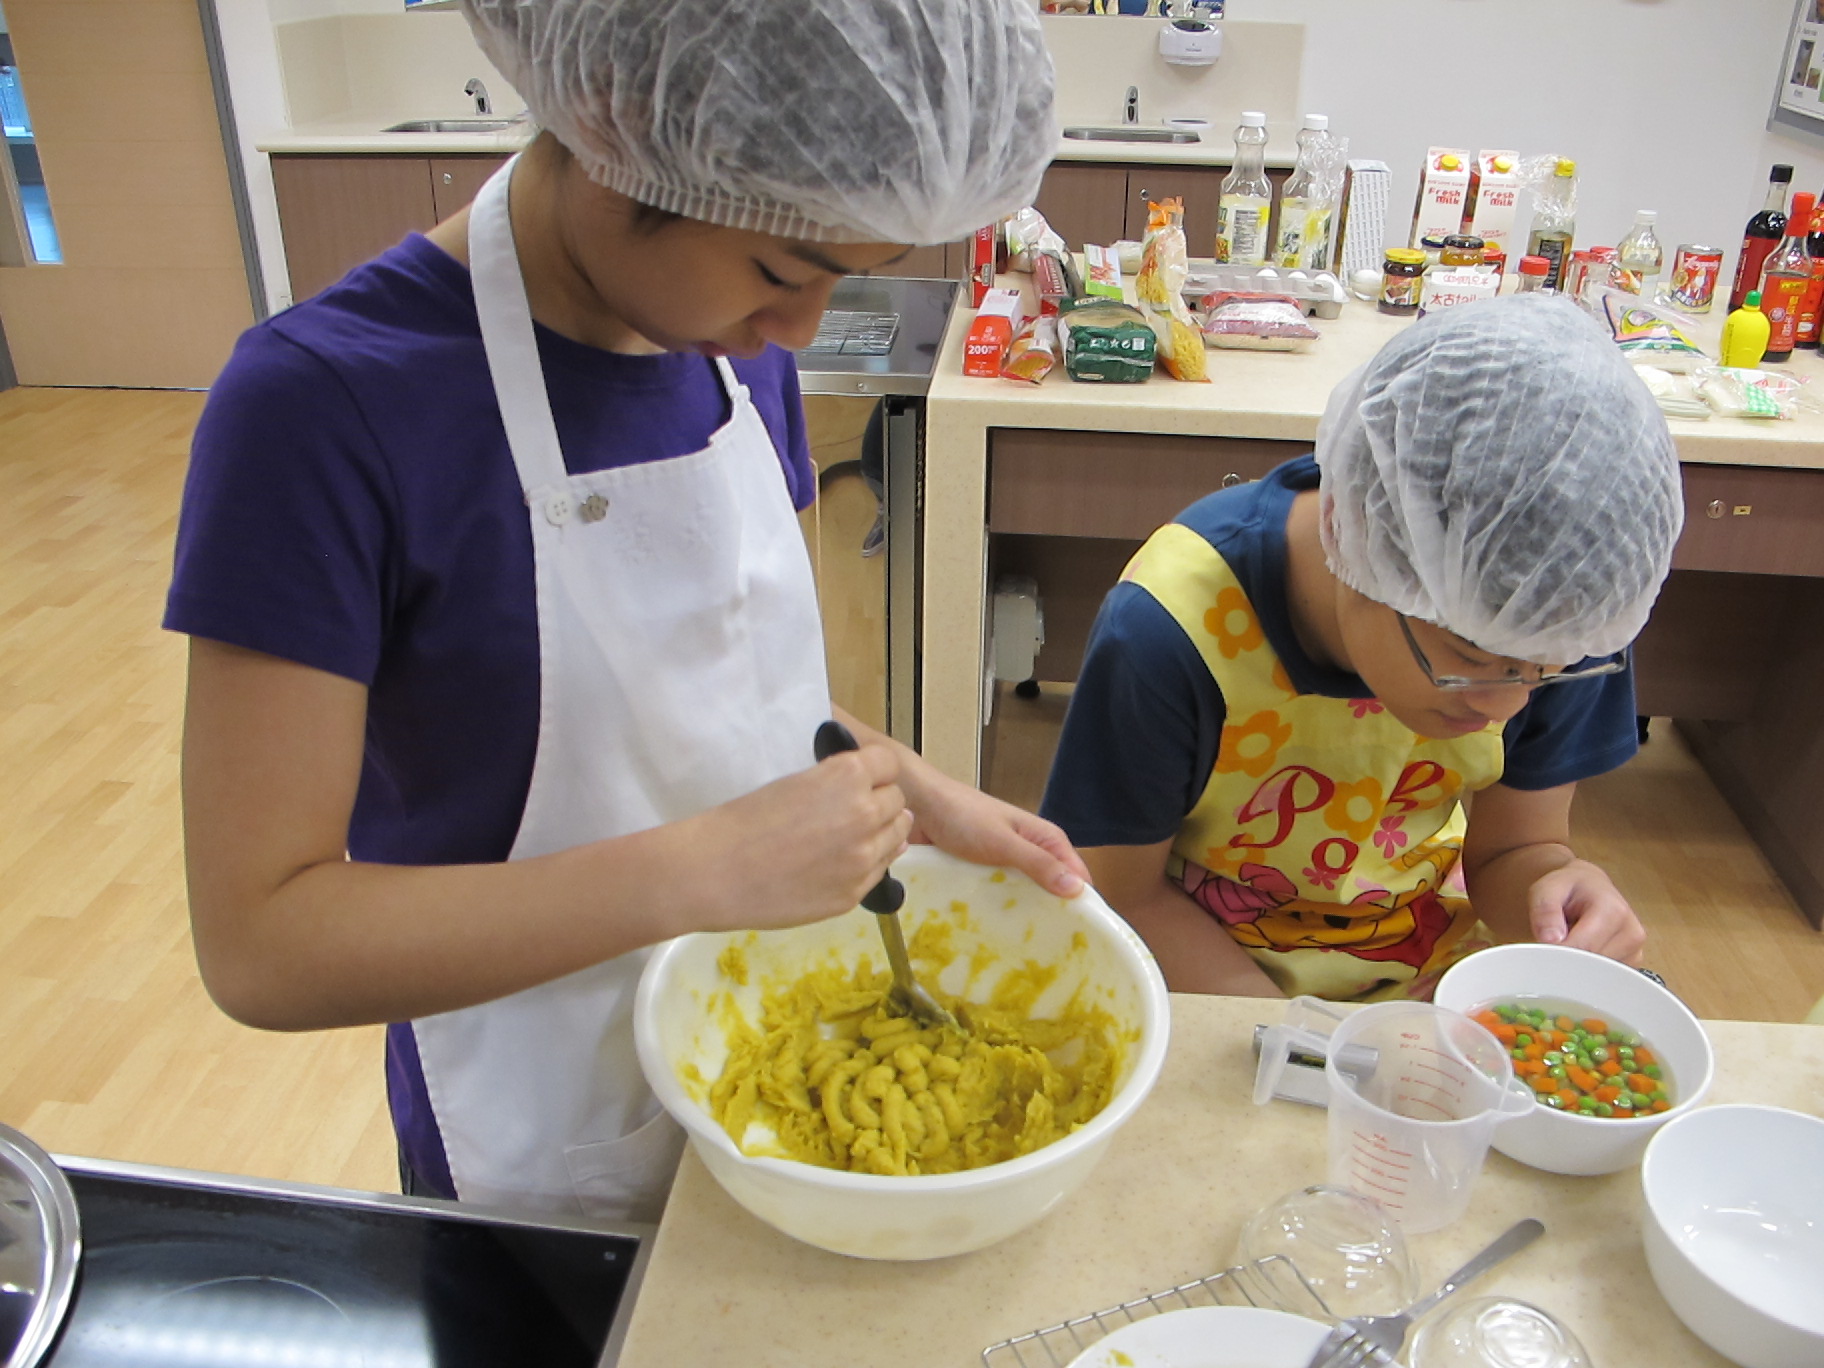 Feeding Hong Kong – Prepare nutritious, simple and low budget cookbook for the needy - Photo - 75